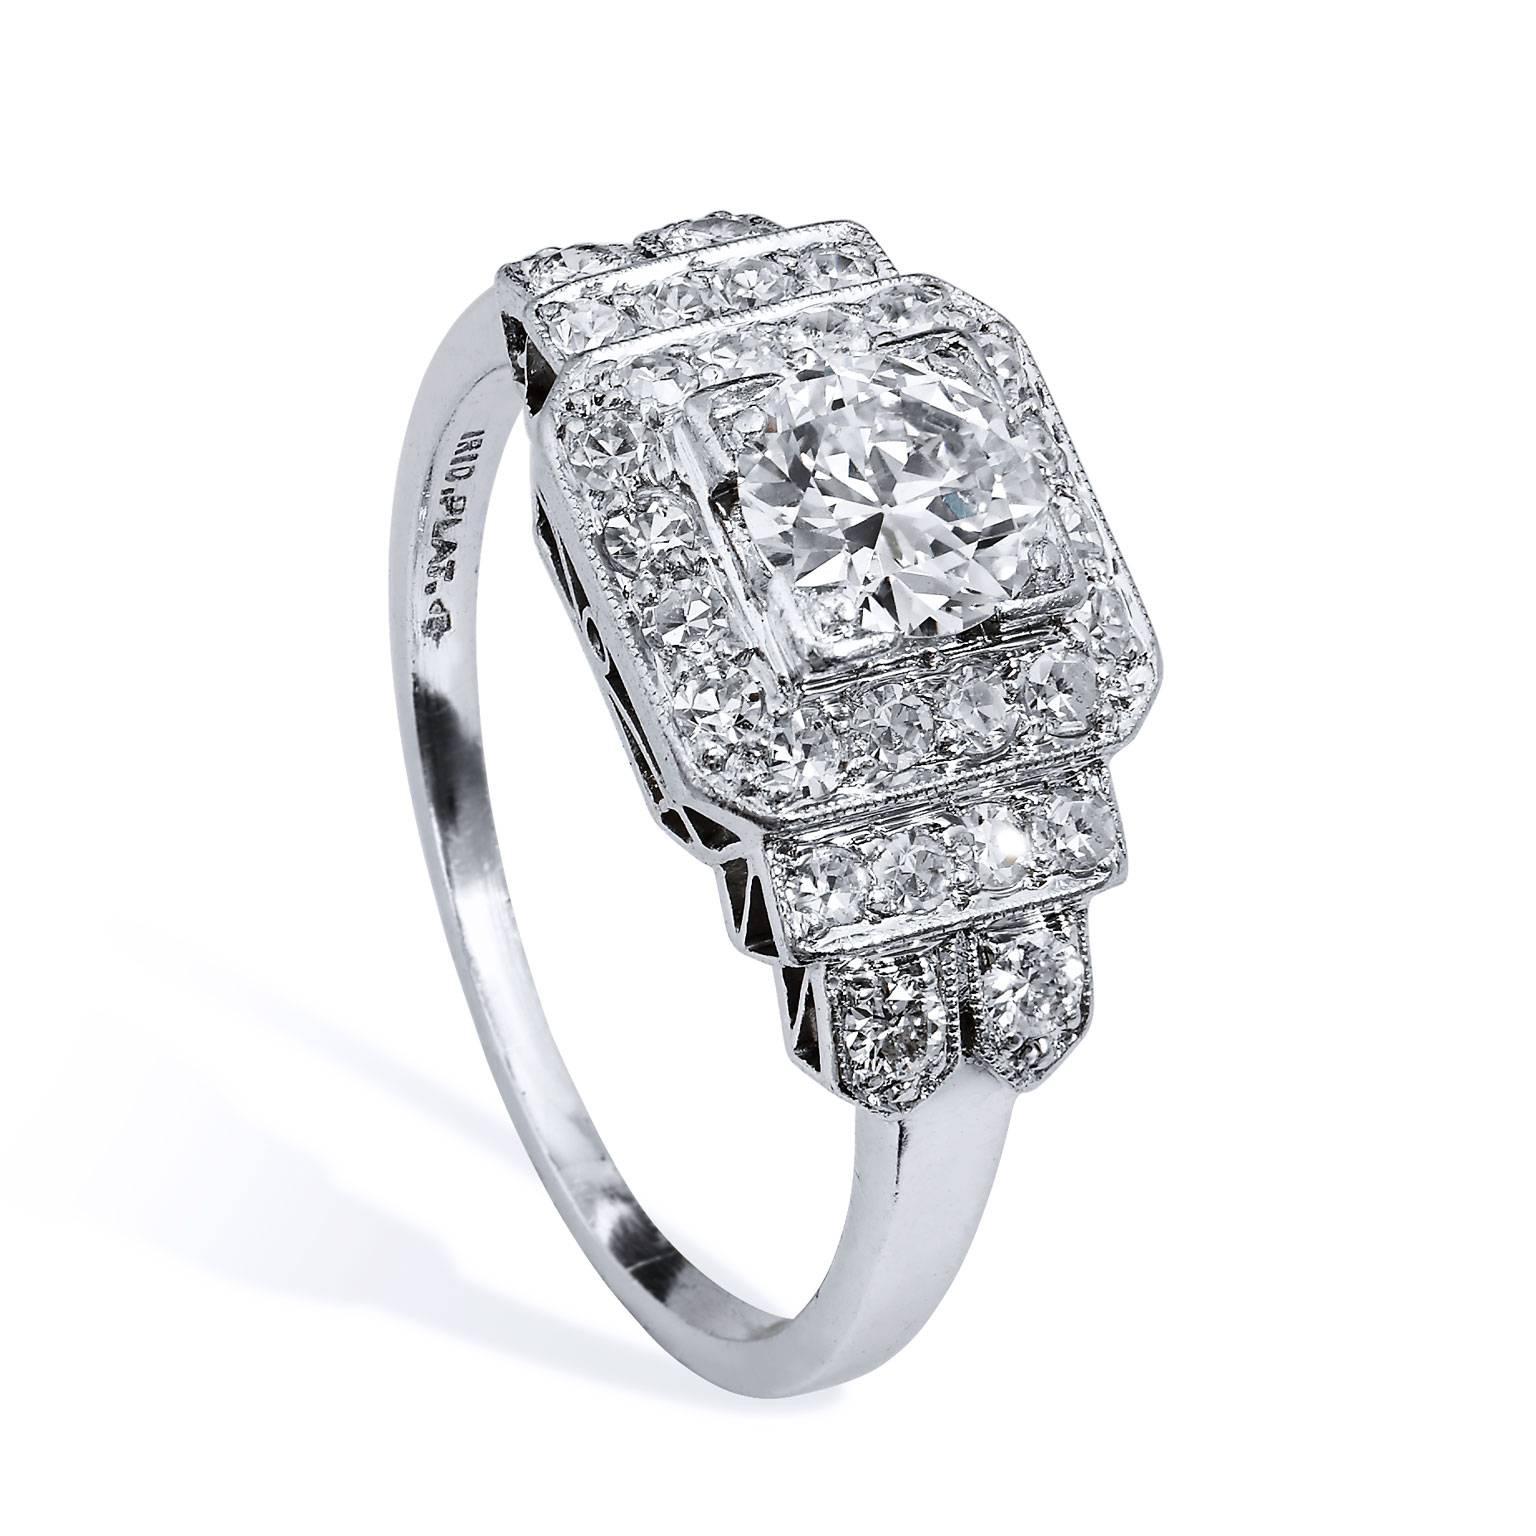 Make a timeless declaration of your love and commitment with this ornate previously loved Art Deco Iridium Platinum engagement ring. A striking 0.60 carat Old European cut diamond set at center (G/H/VS1) is encapsulated by twenty-eight pieces of